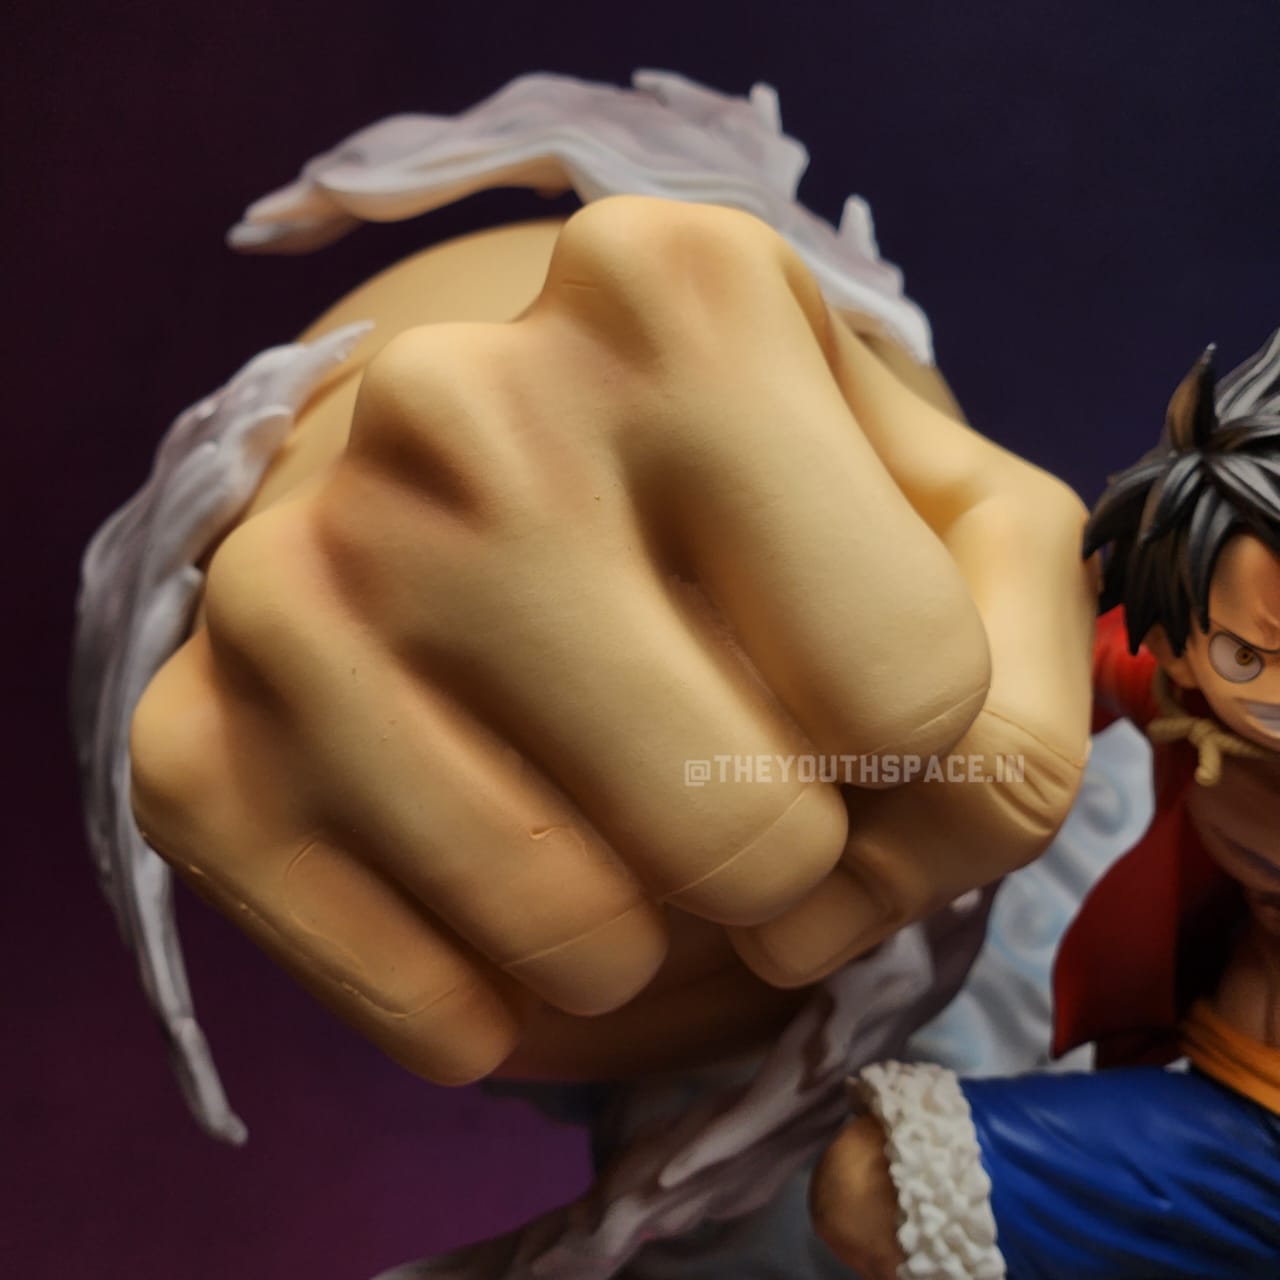 LUFFY GEAR 3 ACTION FIGURE - ONE PIECE